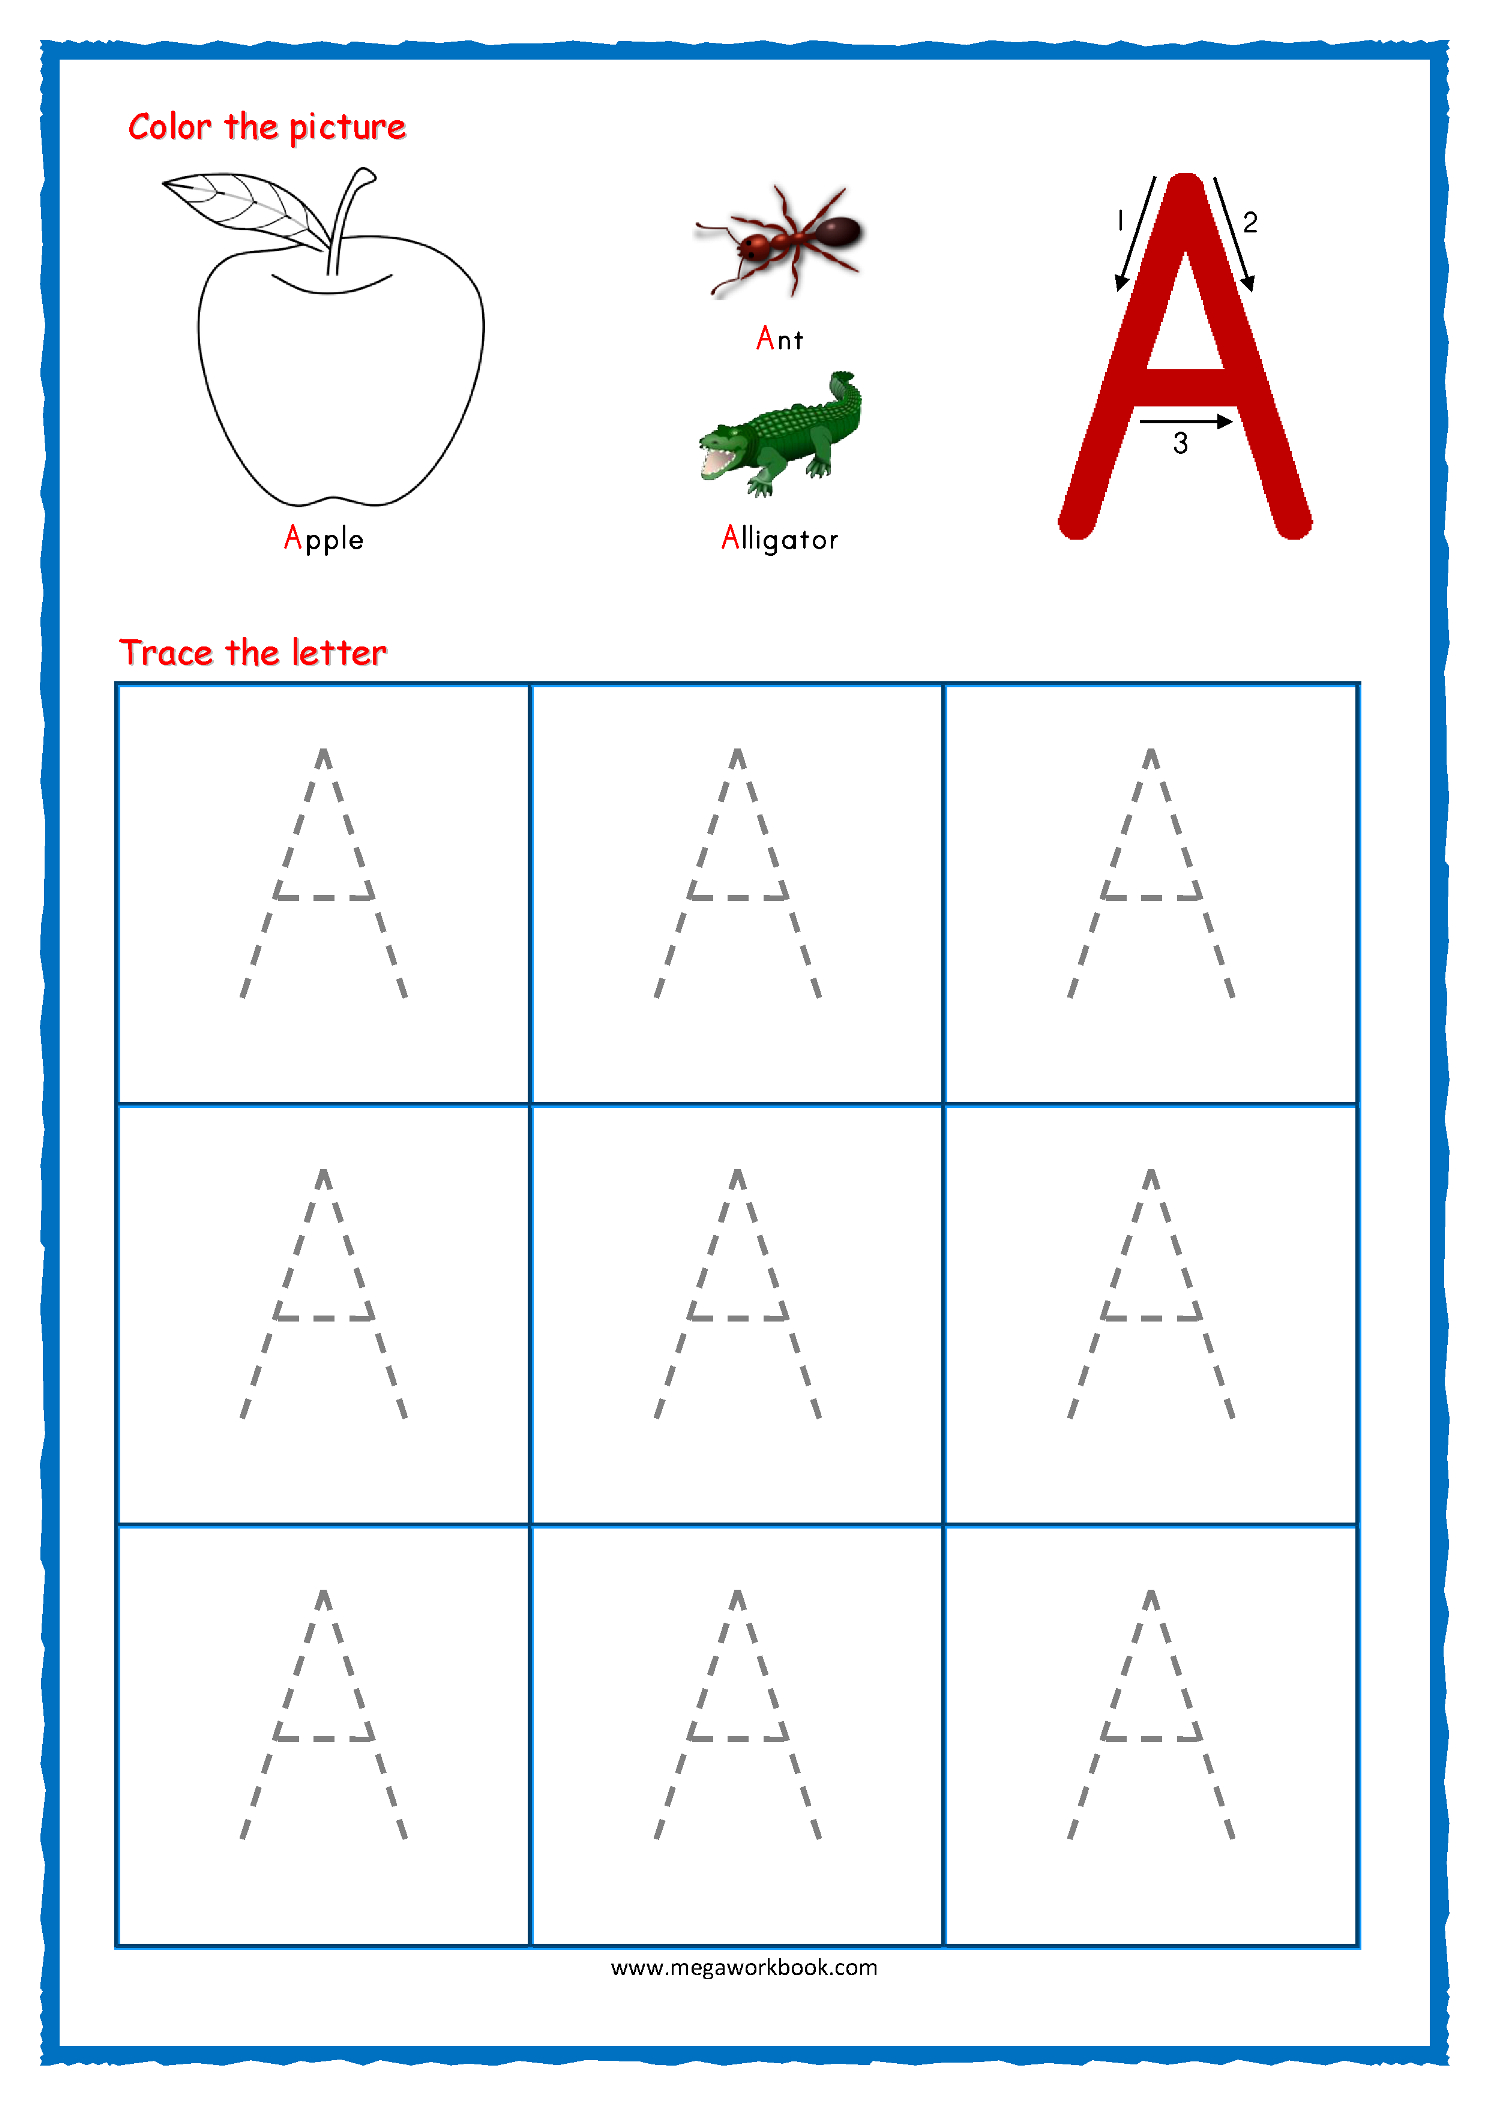 Tracing Letters - Alphabet Tracing - Capital Letters intended for Tracing Letters For Nursery